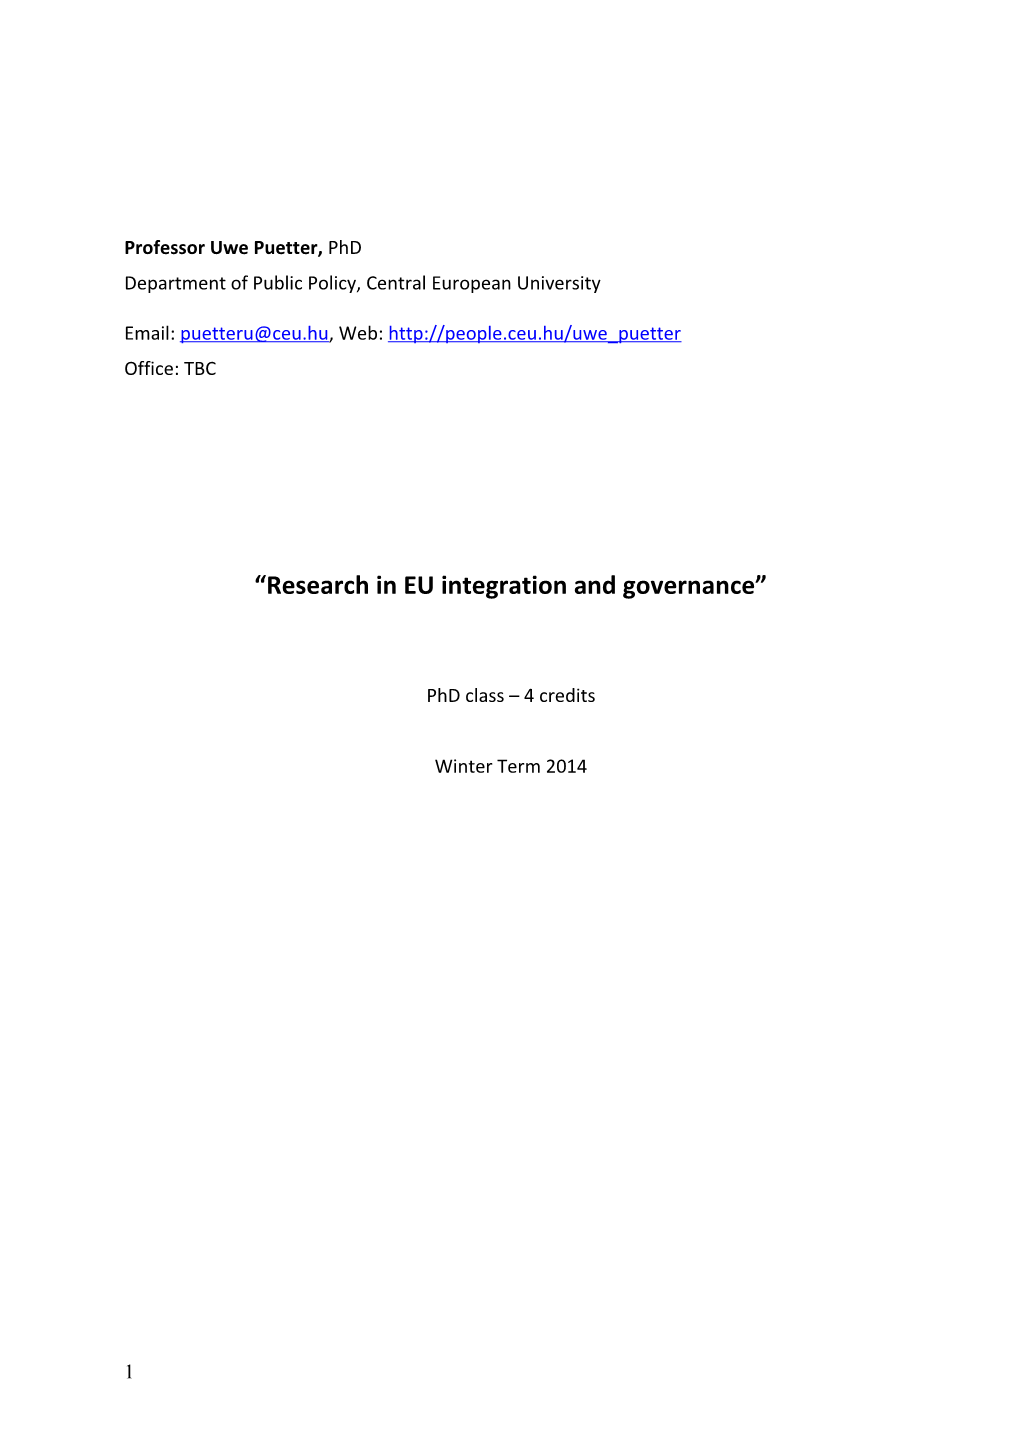 Research in EU Integration and Governance